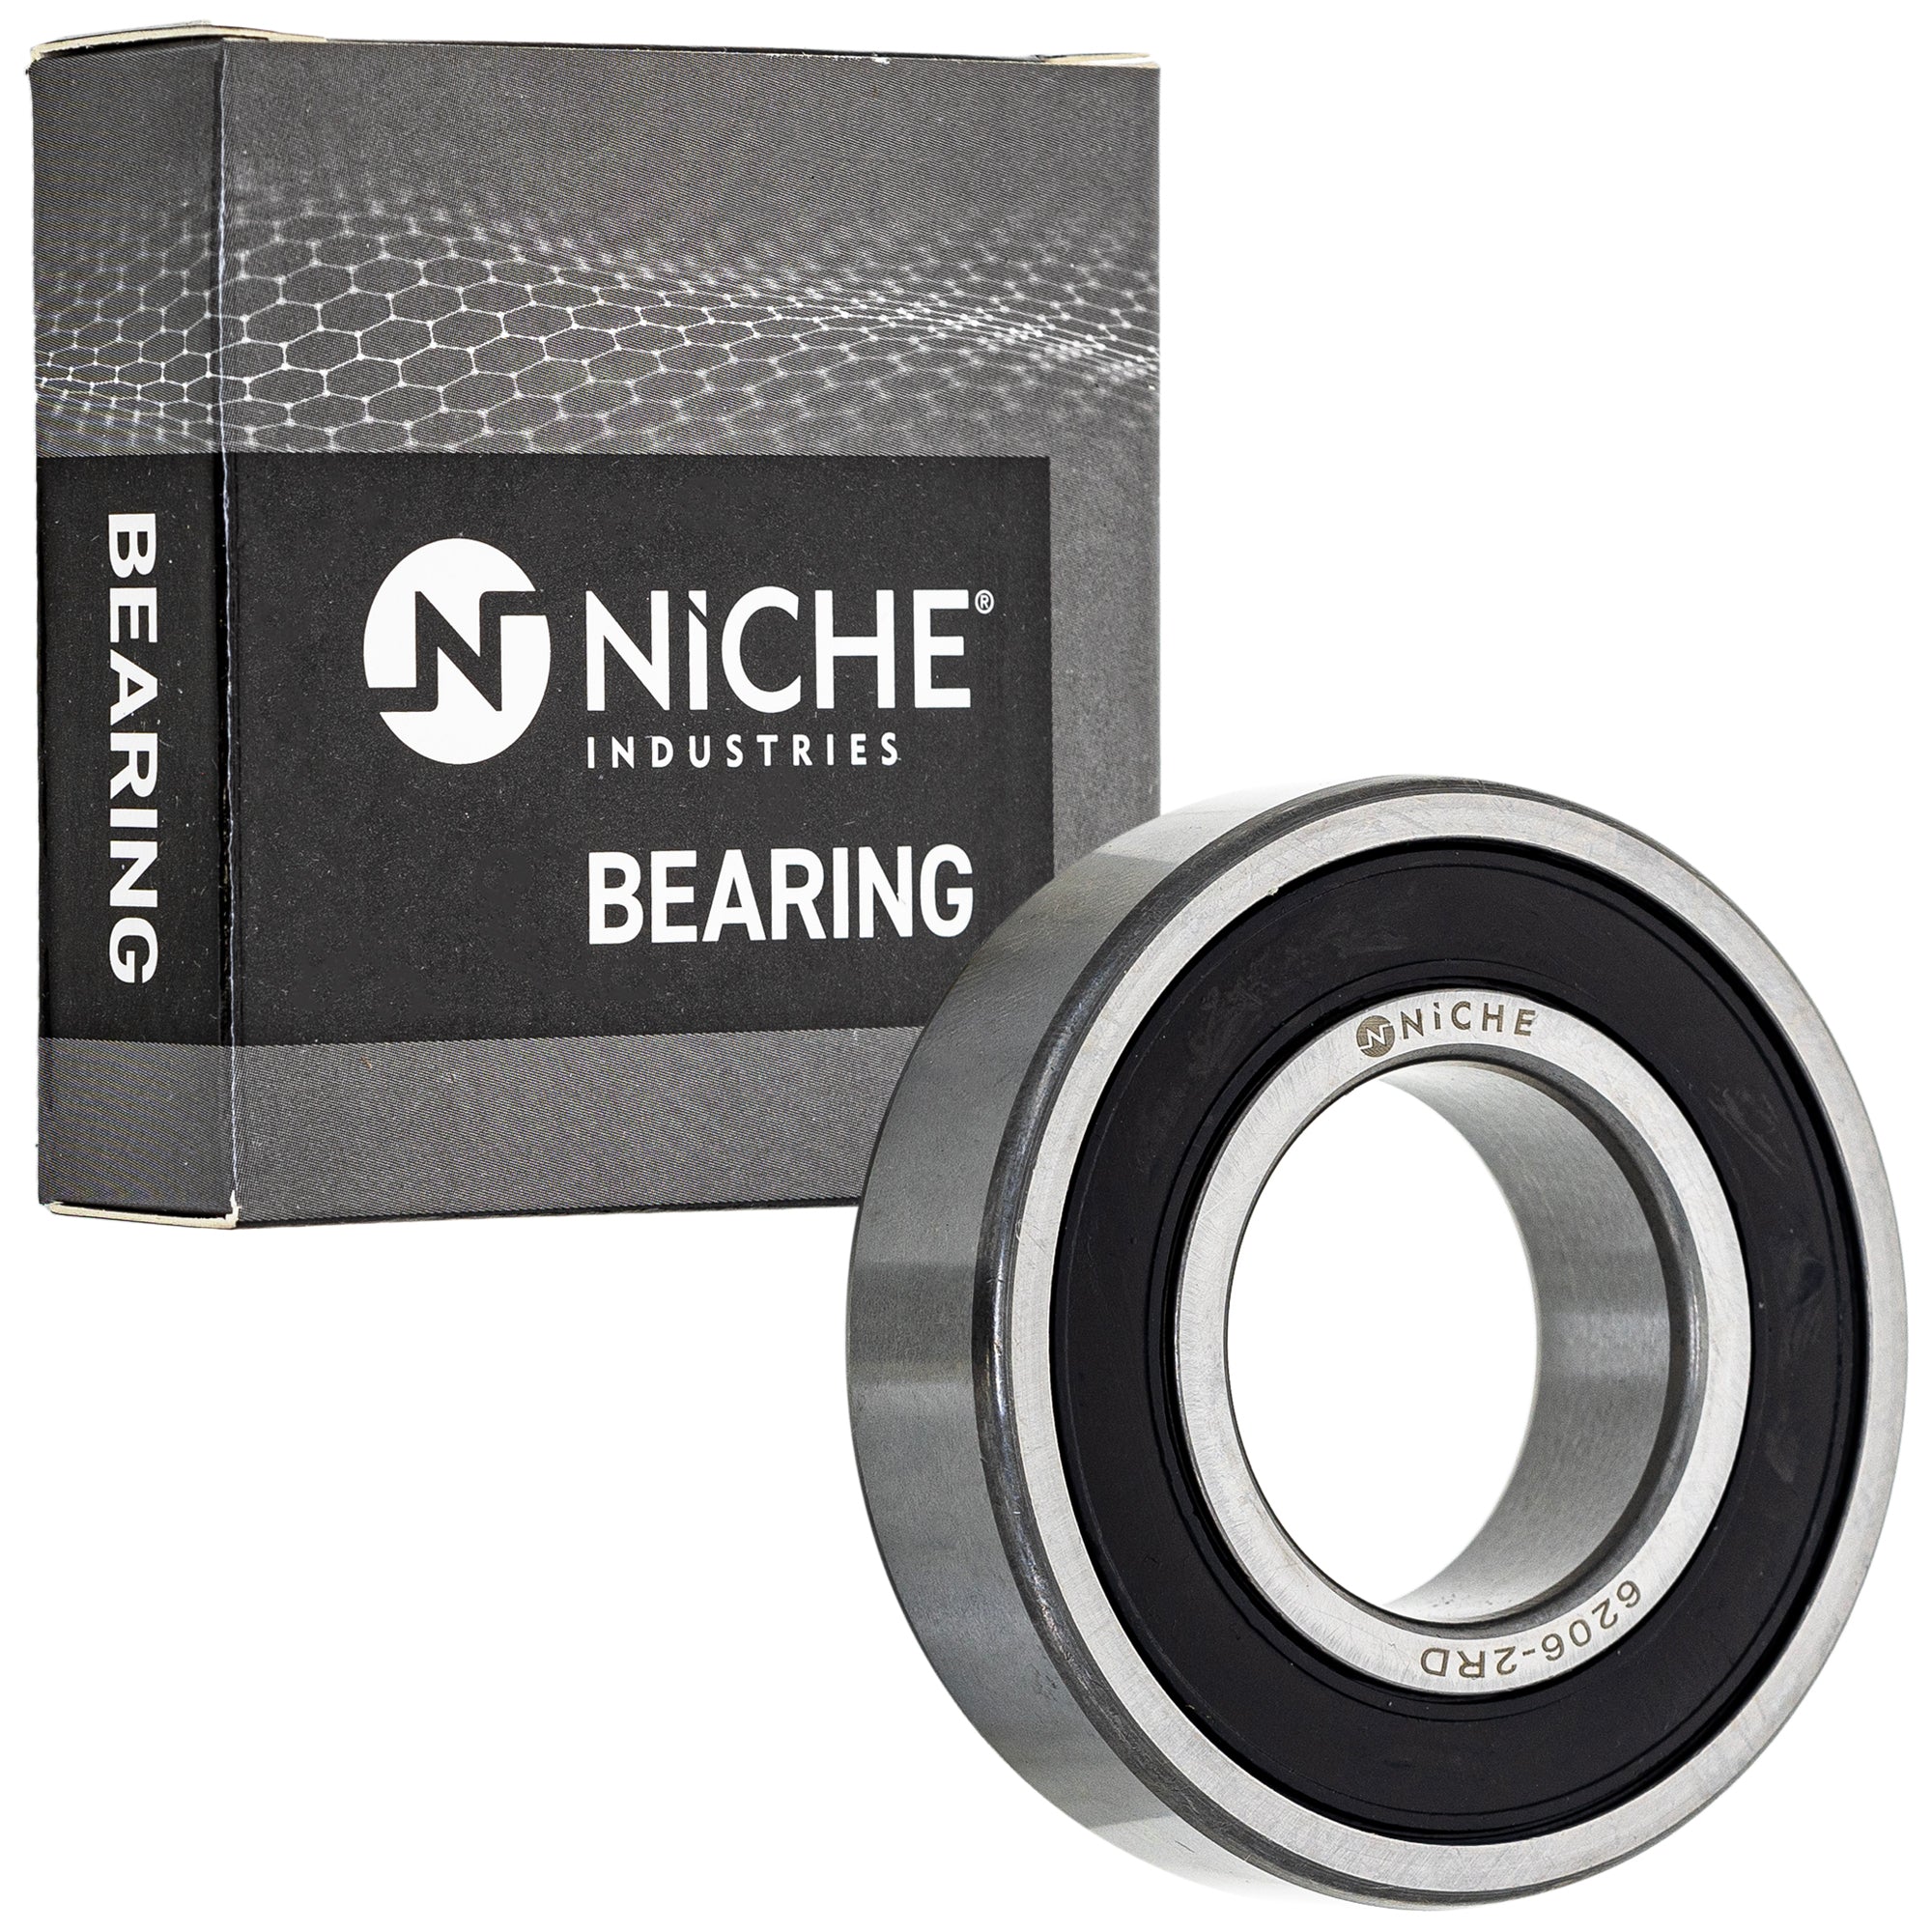 NICHE 519-CBB2270R Bearing 10-Pack for zOTHER ZRX1100 ZR1100 Z1